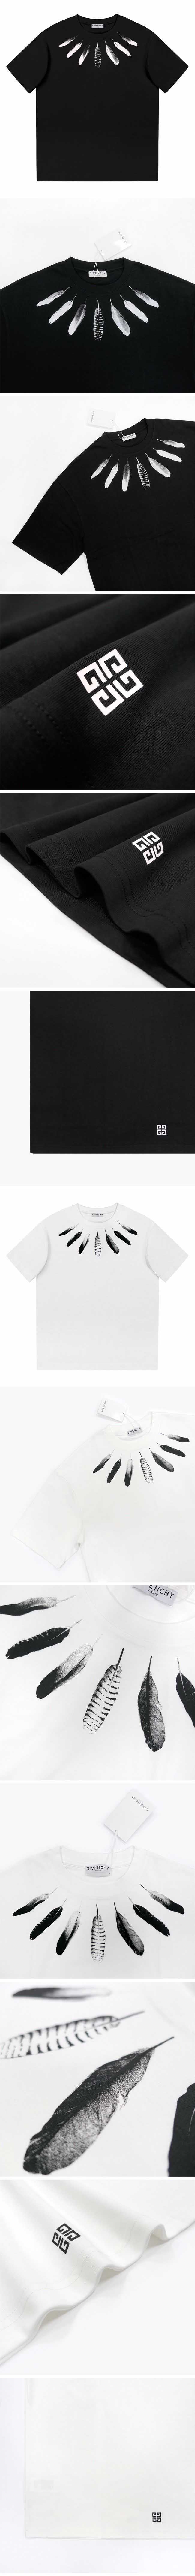 Givenchy Wing Design Tee ジバンシー ウィング デザイン Tシャツ